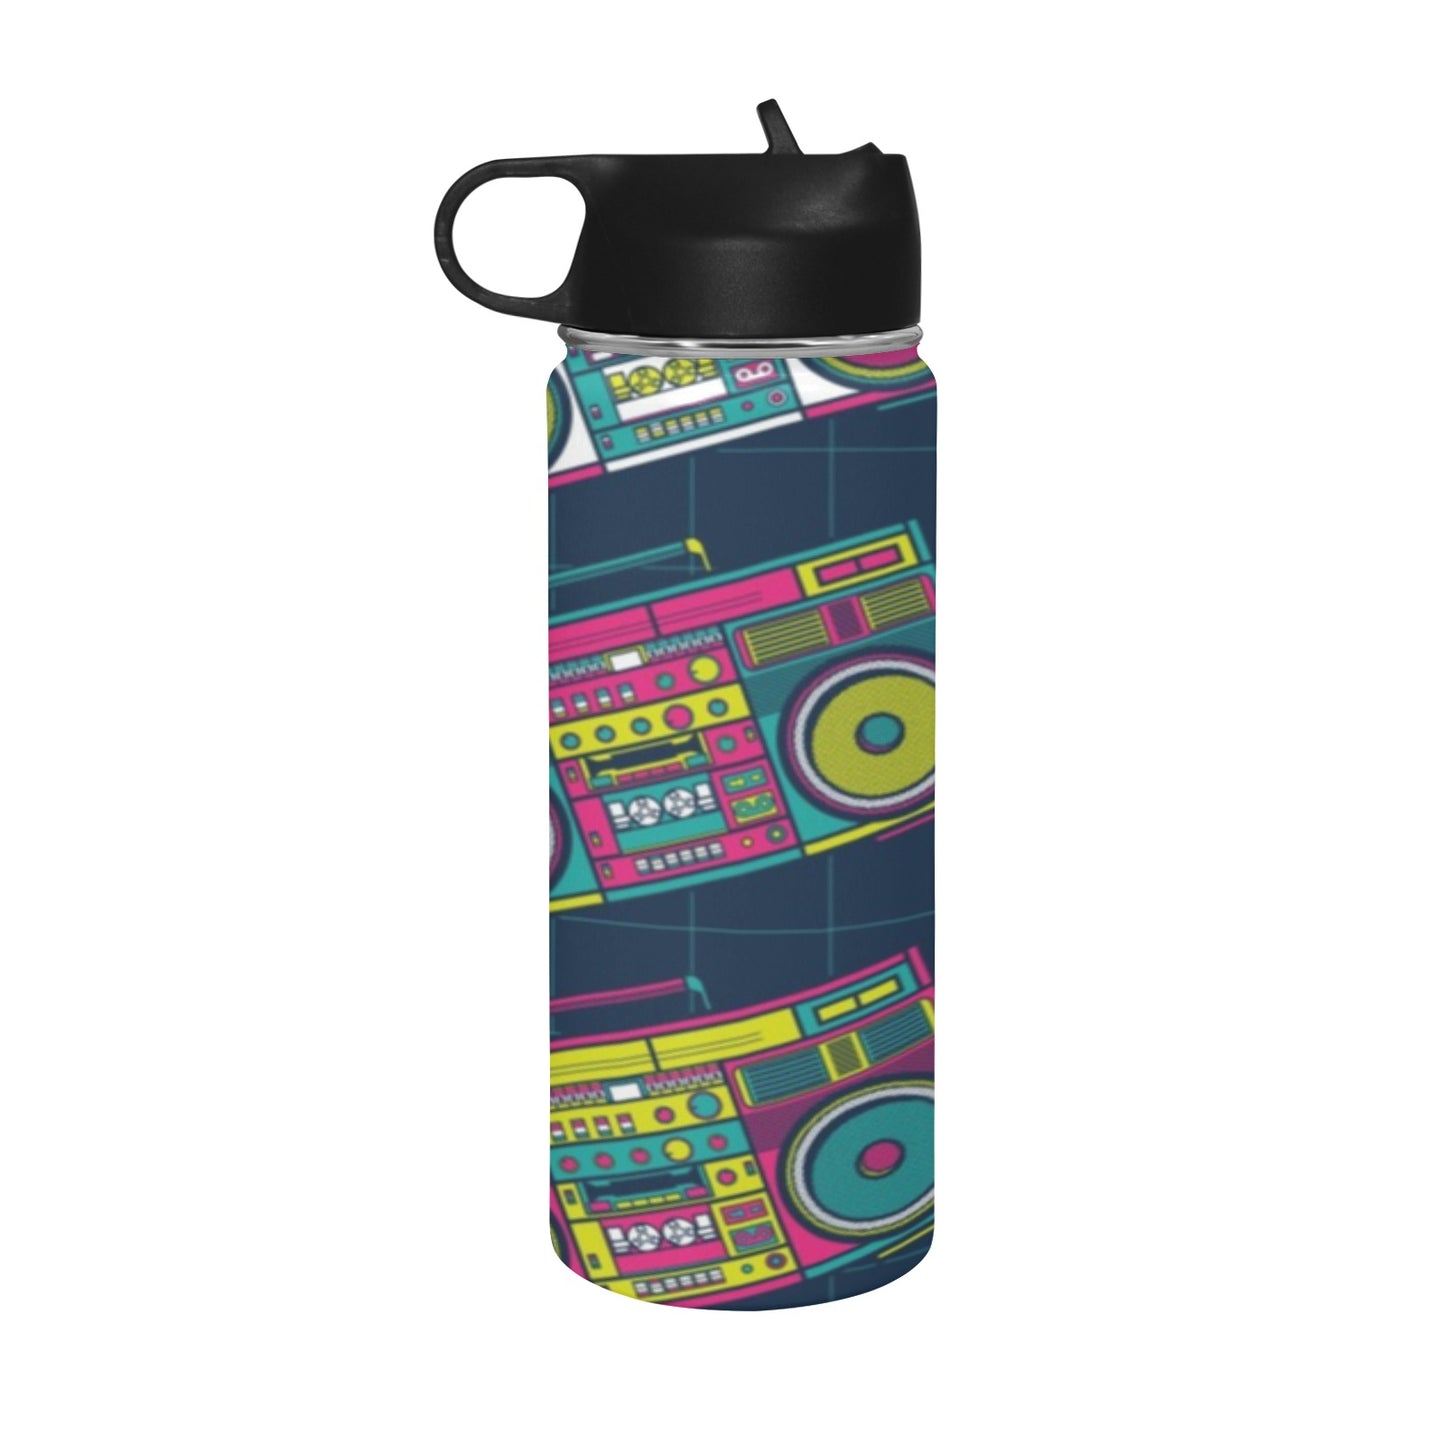 Boombox Insulated Water Bottle with Straw Lid (18 oz) Insulated Water Bottle with Straw Lid